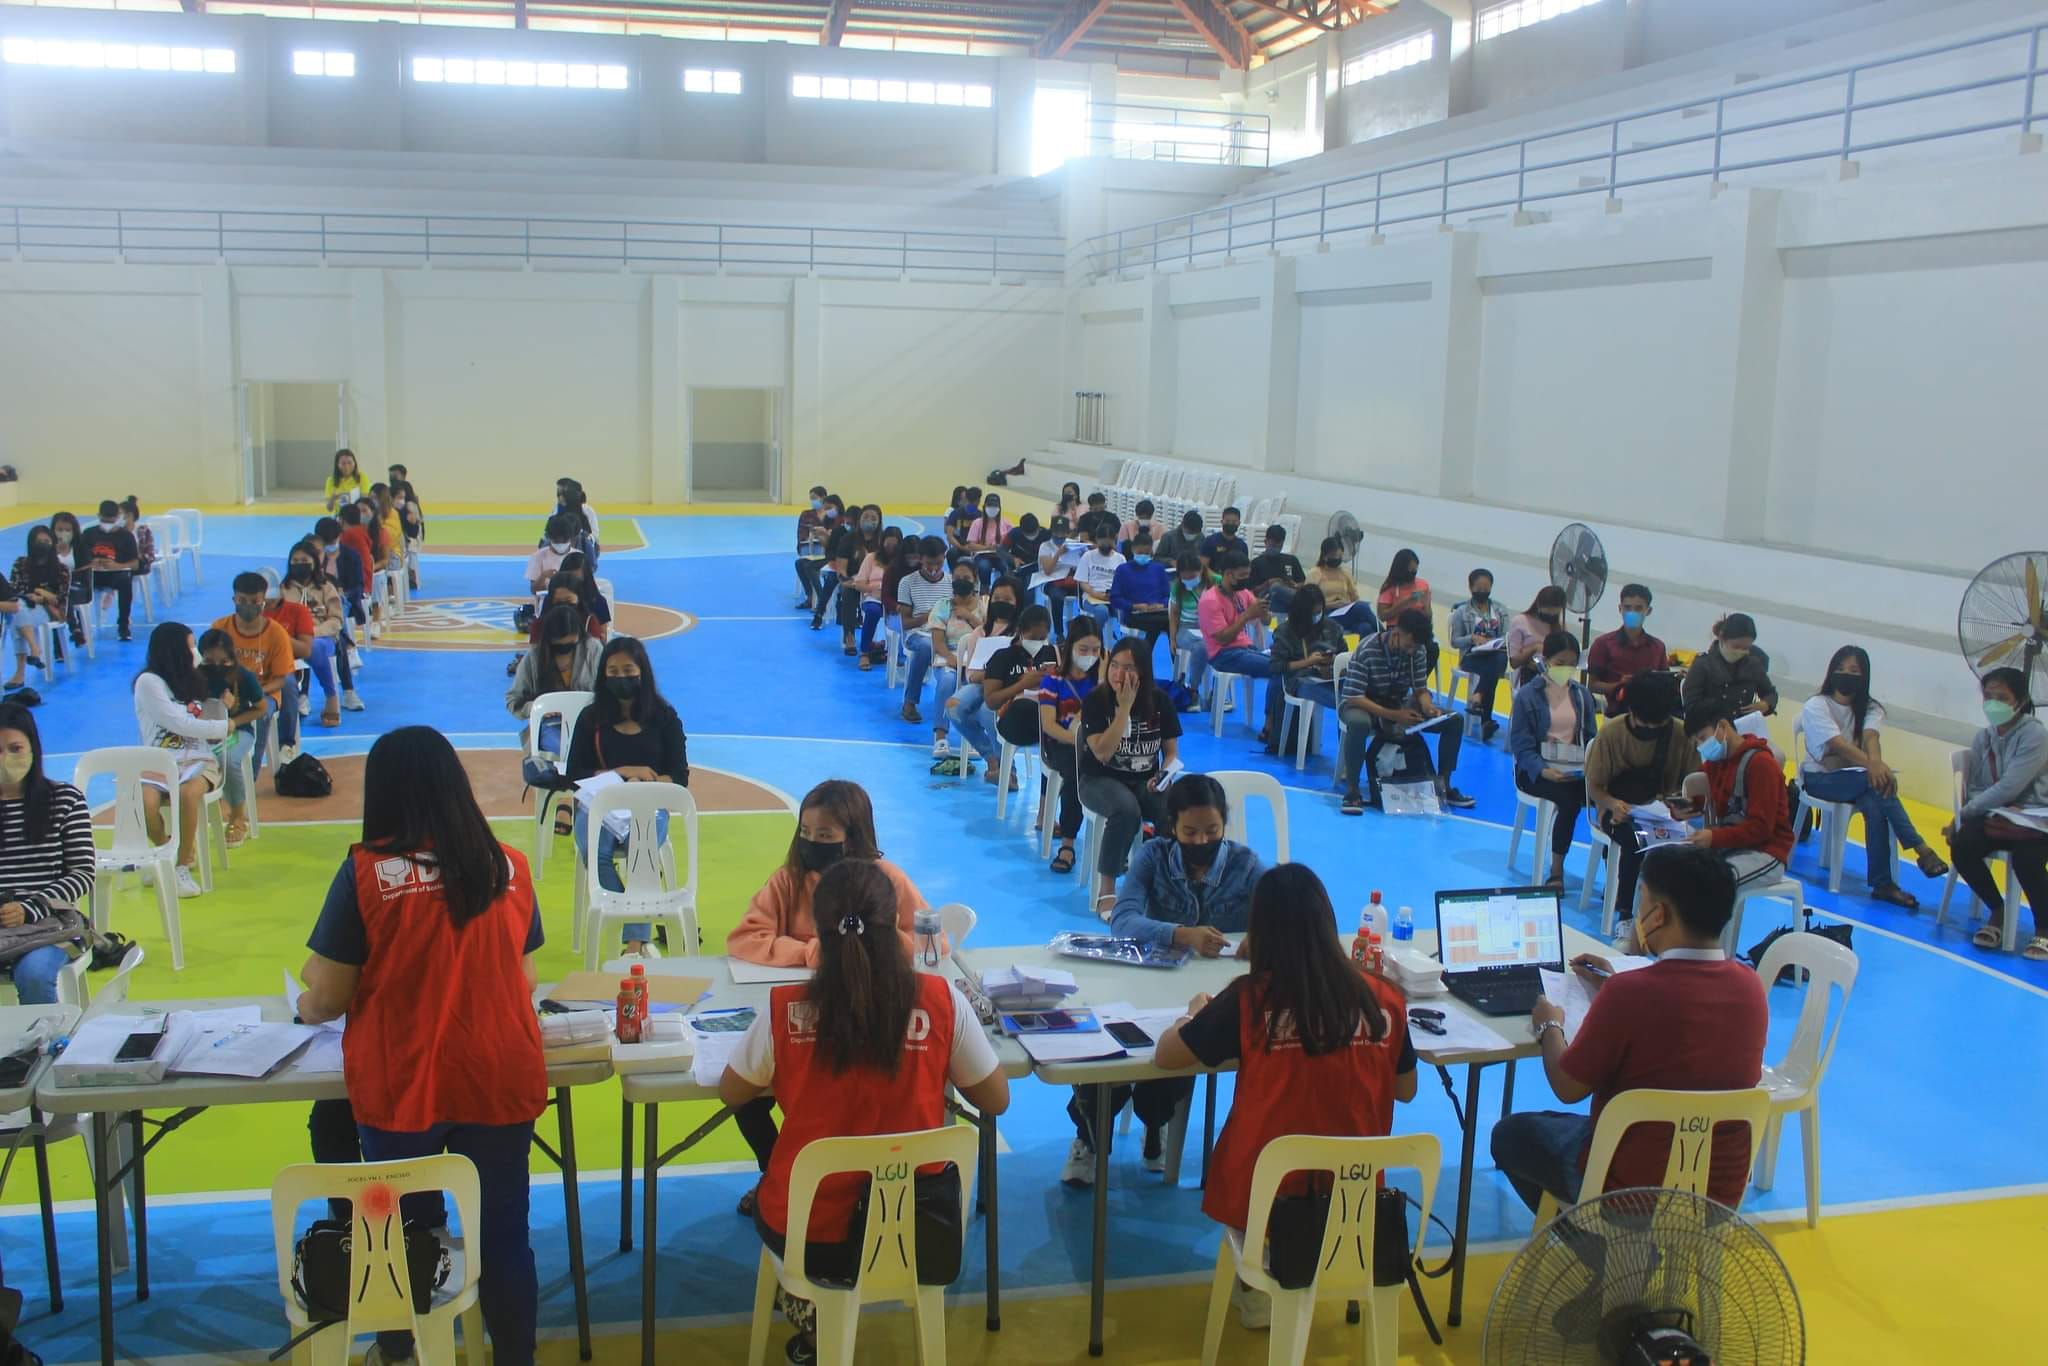 194 college students of Pilar receive educational assistance from DSWD V